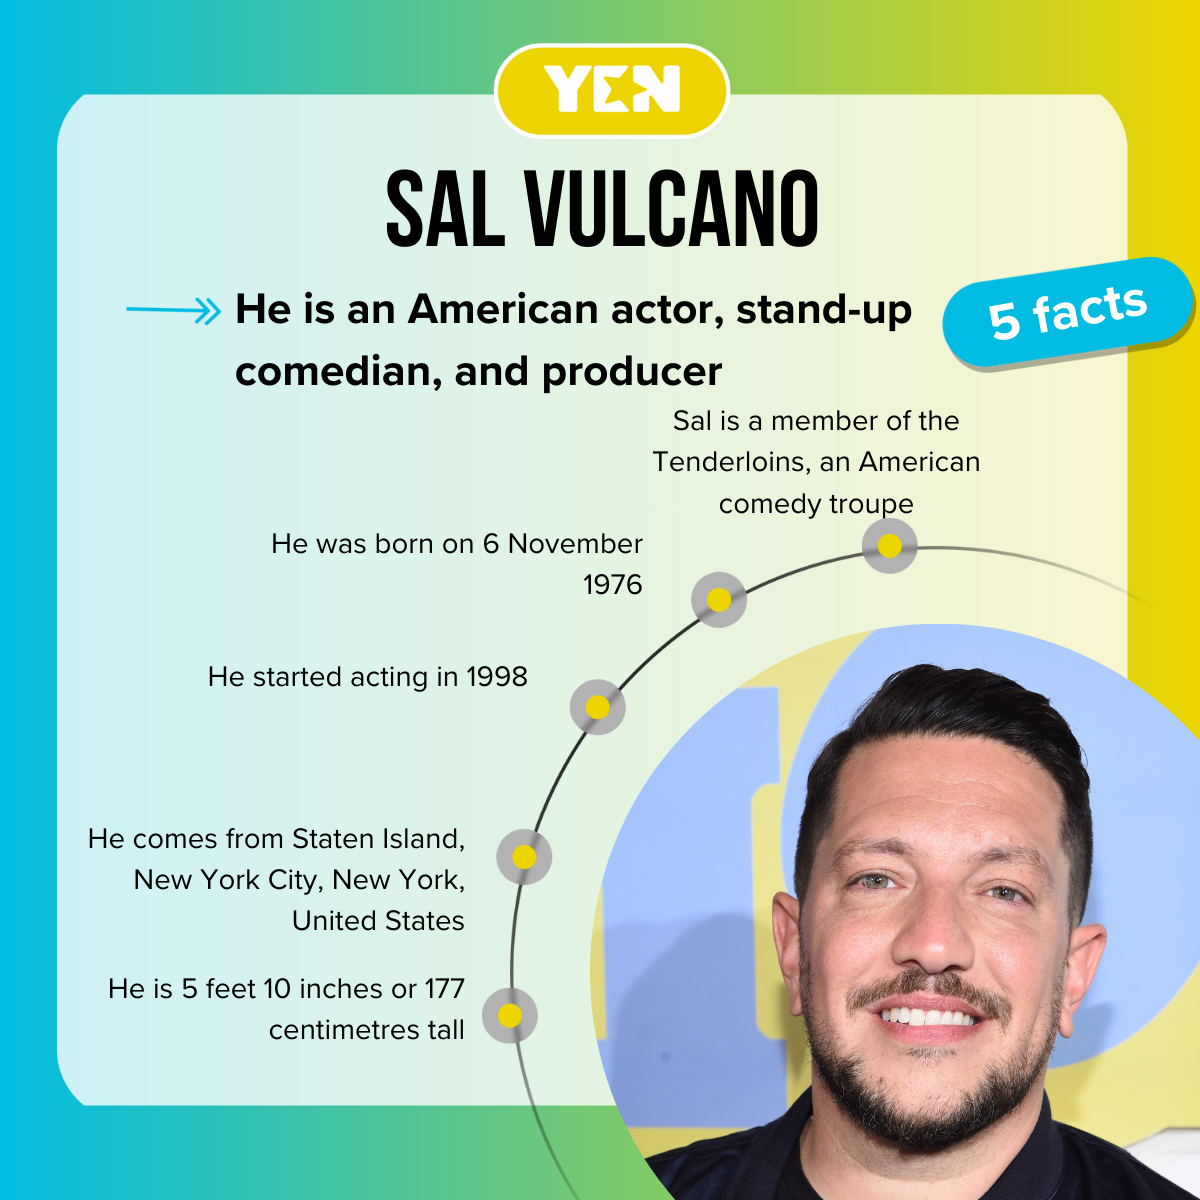 Facts about Sal Vulcano